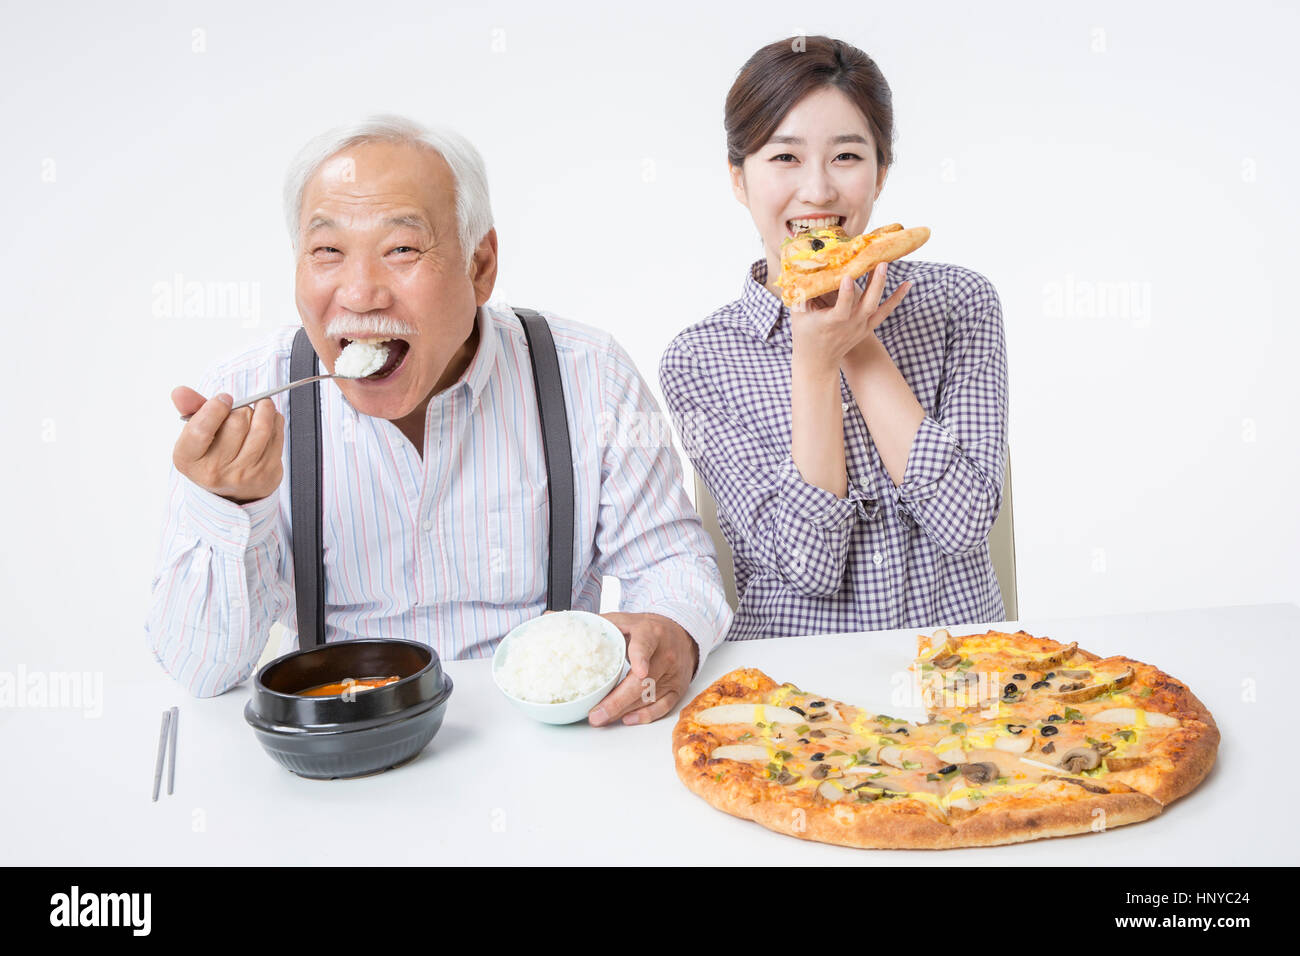 Smiling senior man eating rice and smiling young woman eating pizza Stock Photo